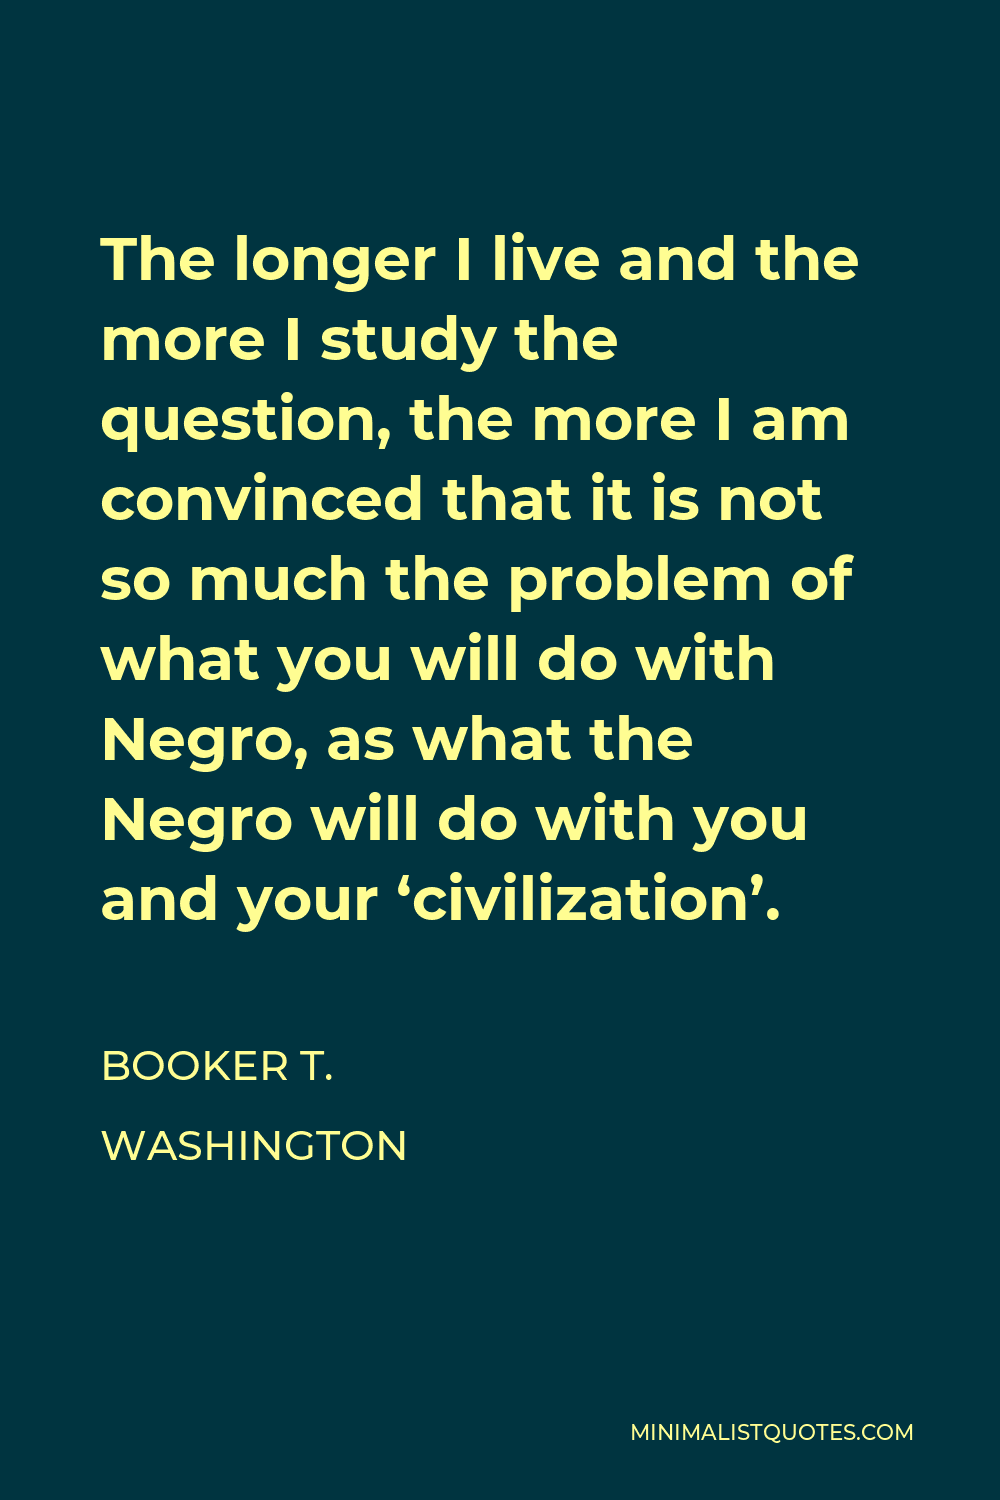 Booker T. Washington Quote - The longer I live and the more I study the question, the more I am convinced that it is not so much the problem of what you will do with Negro, as what the Negro will do with you and your ‘civilization’.